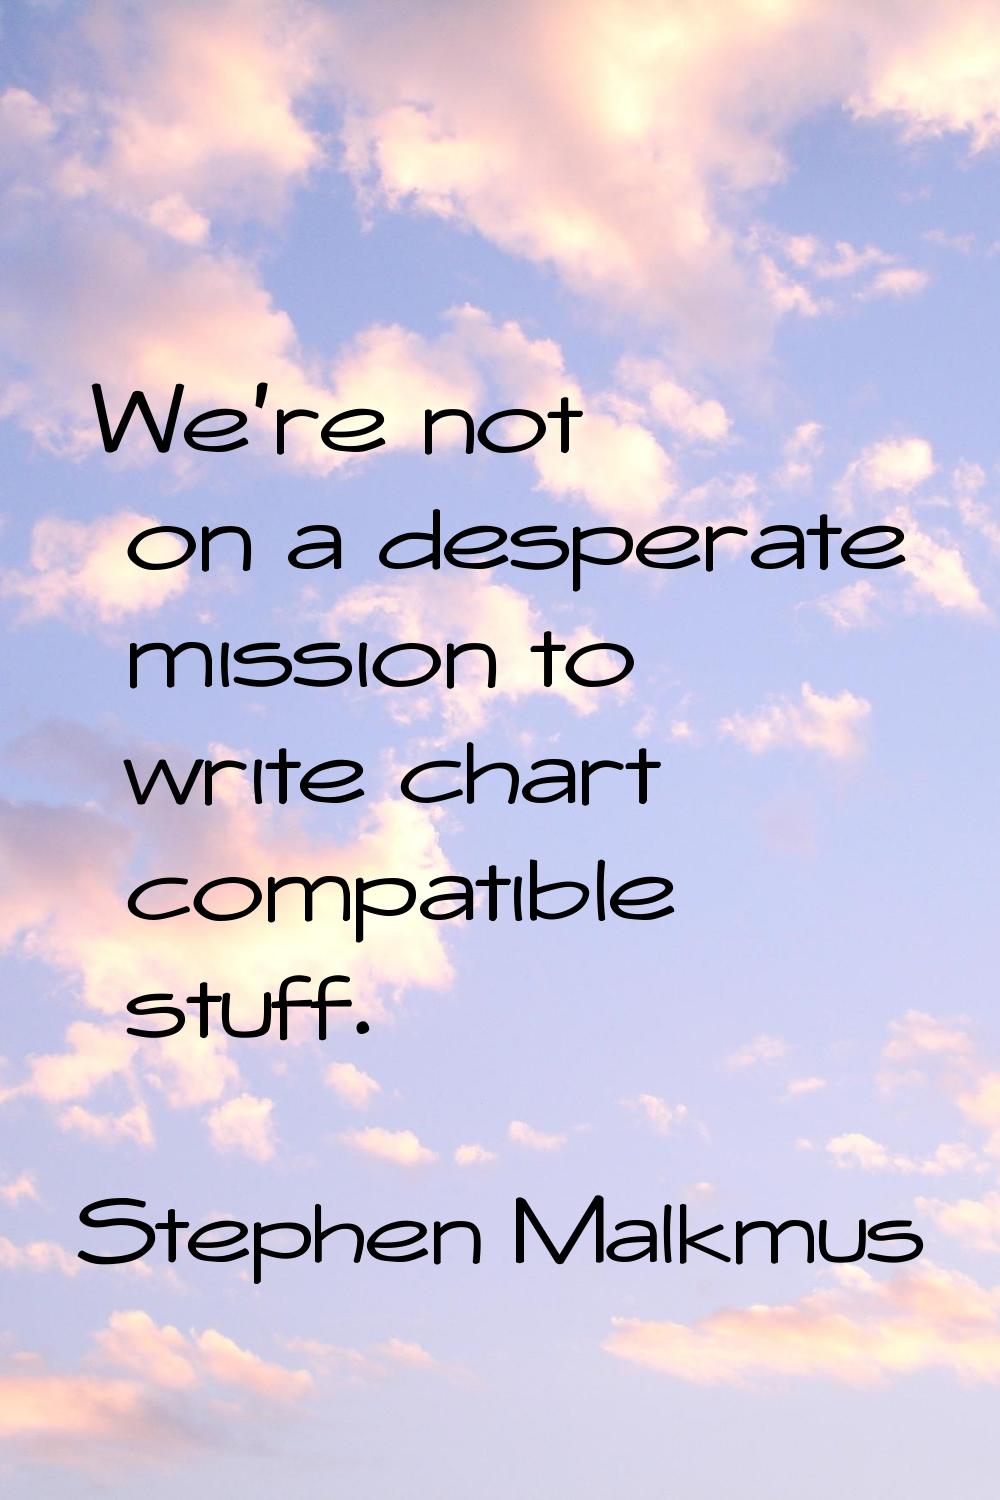 We're not on a desperate mission to write chart compatible stuff.